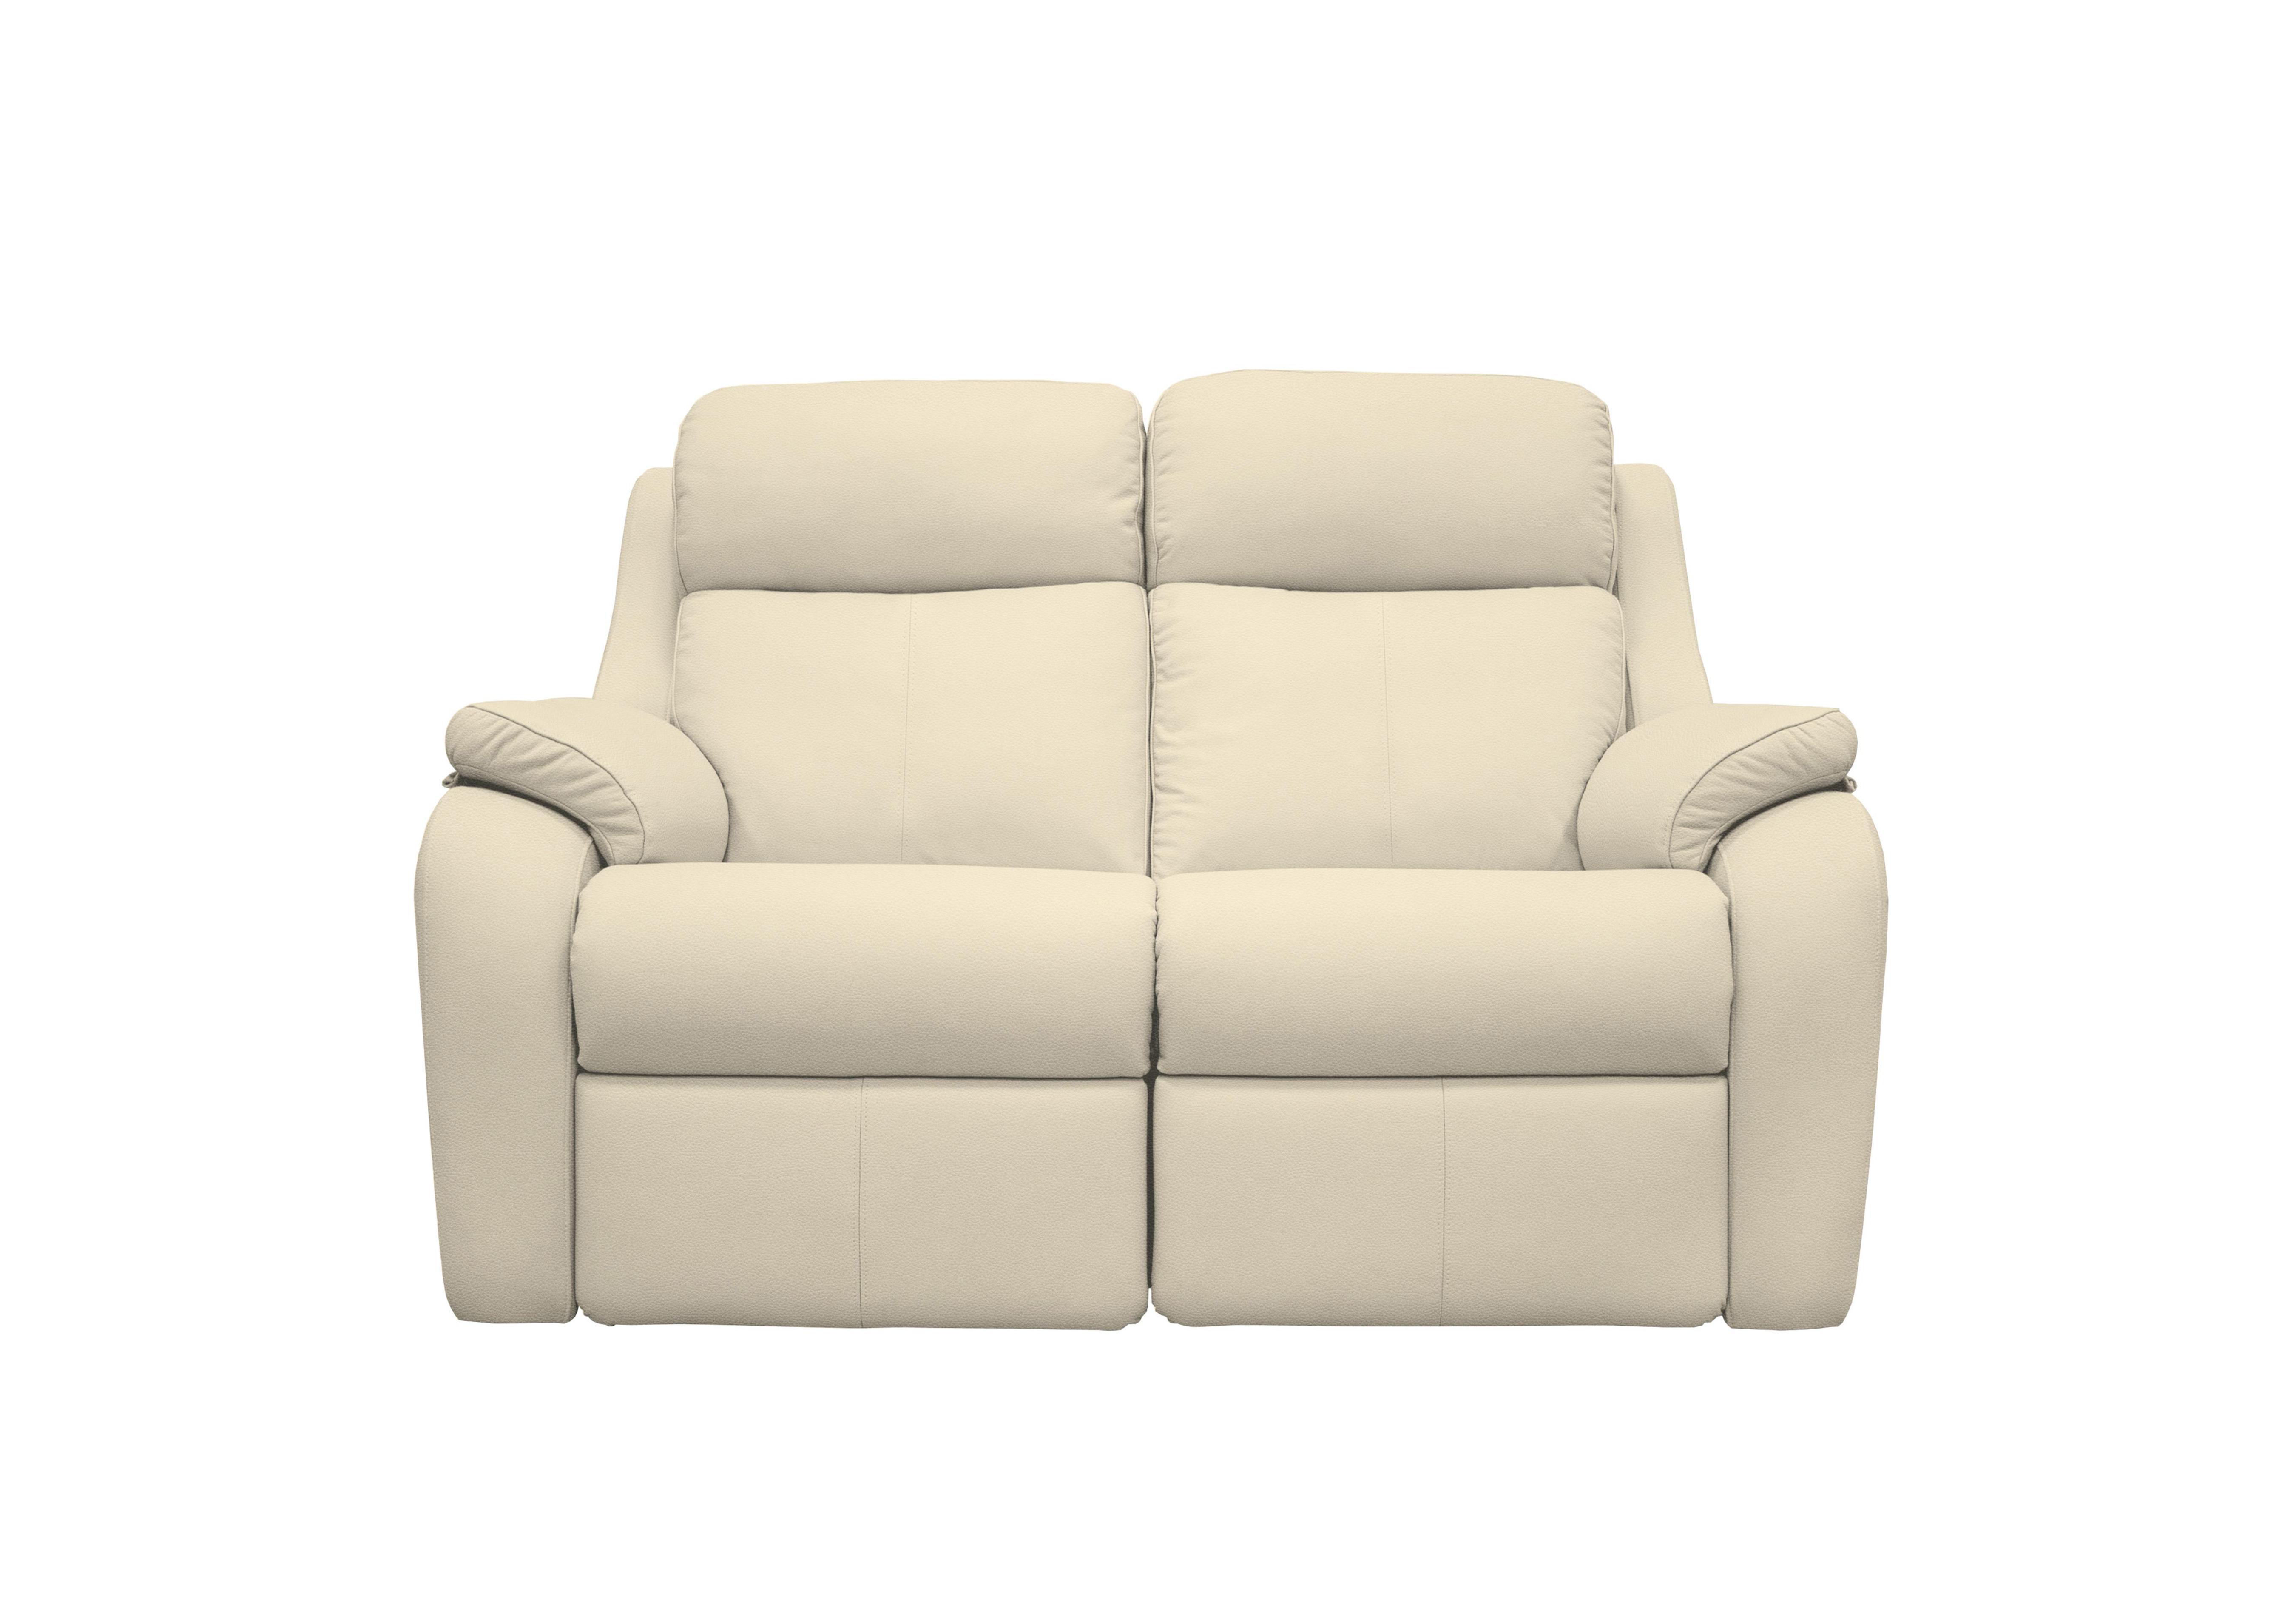 Kingsbury 2 Seater Leather Power Recliner Sofa with Power Headrests in L843 Cambridge Stone on Furniture Village